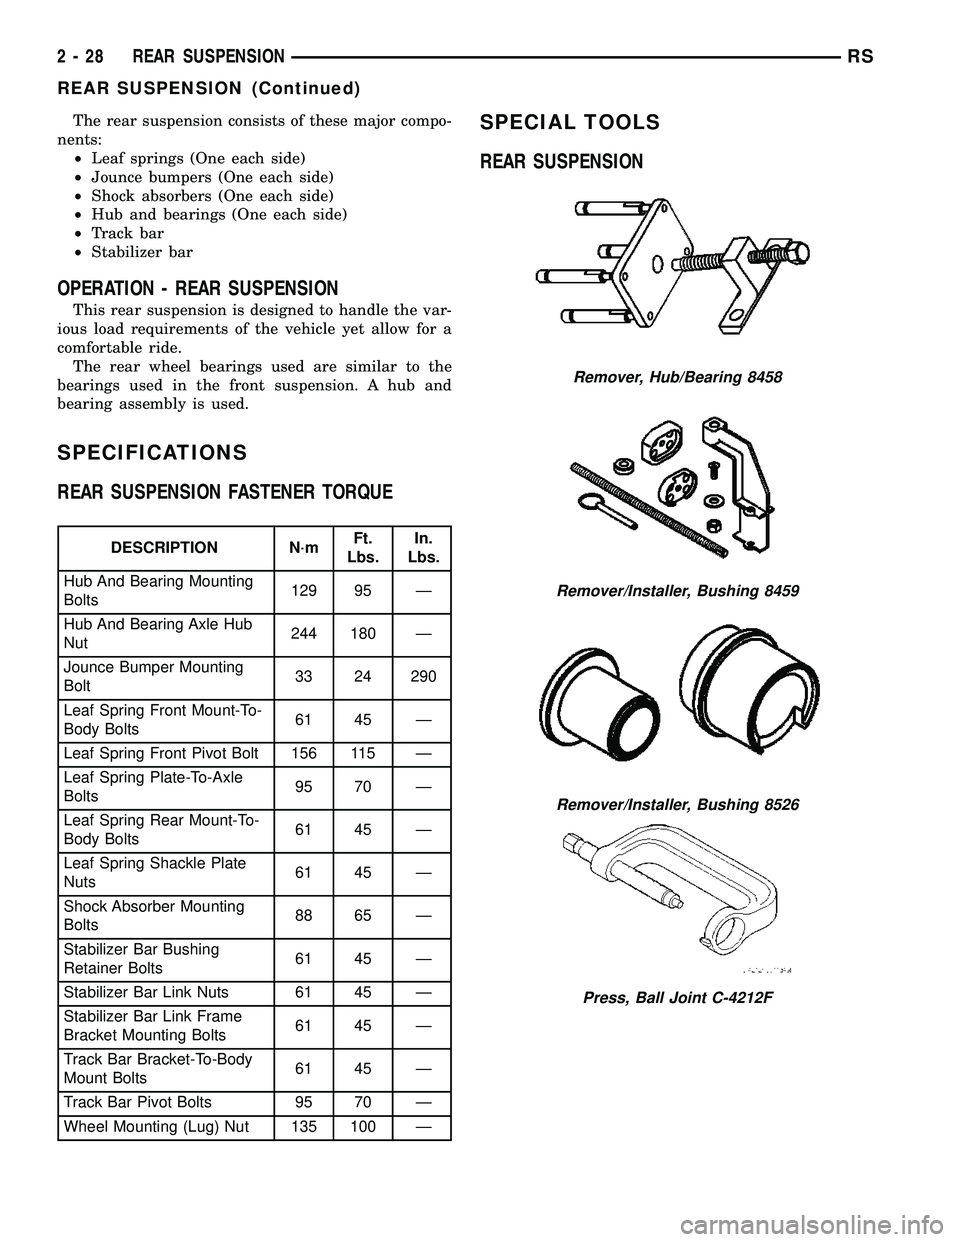 DODGE TOWN AND COUNTRY 2004  Service Manual The rear suspension consists of these major compo-
nents:
²Leaf springs (One each side)
²Jounce bumpers (One each side)
²Shock absorbers (One each side)
²Hub and bearings (One each side)
²Track b